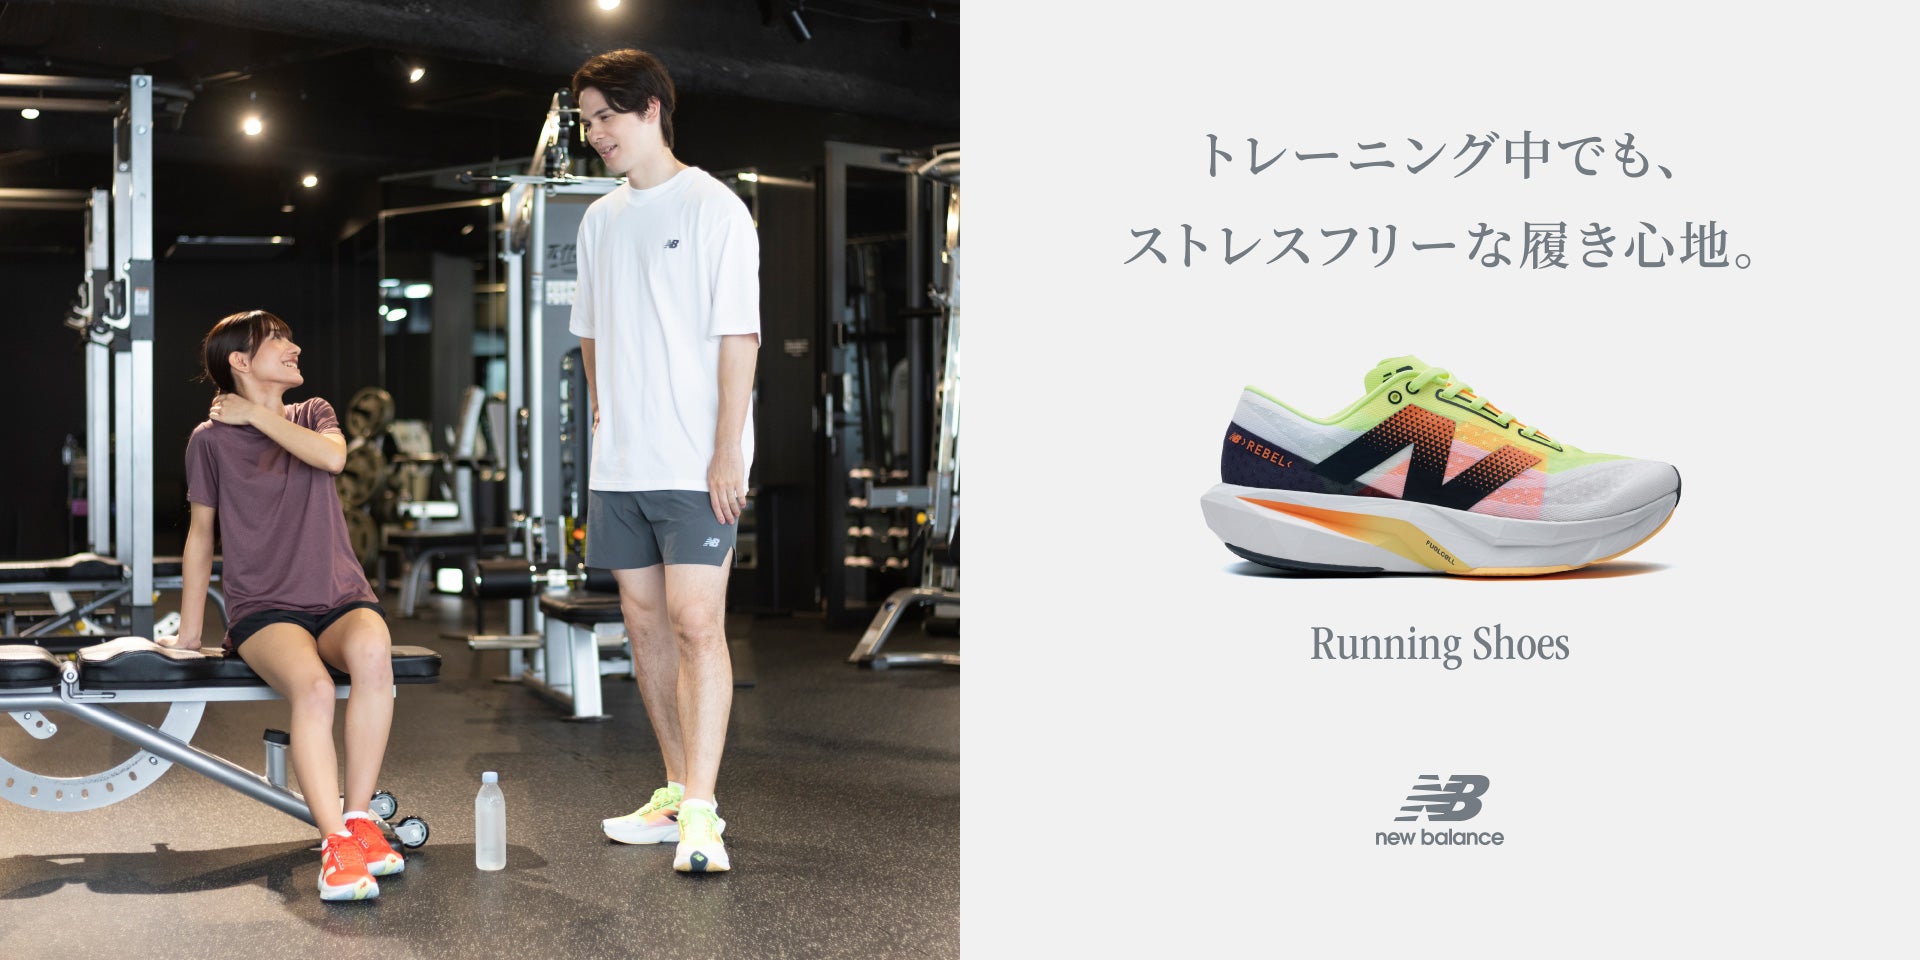 Stress-free comfort even during training. Running Shoes new balance